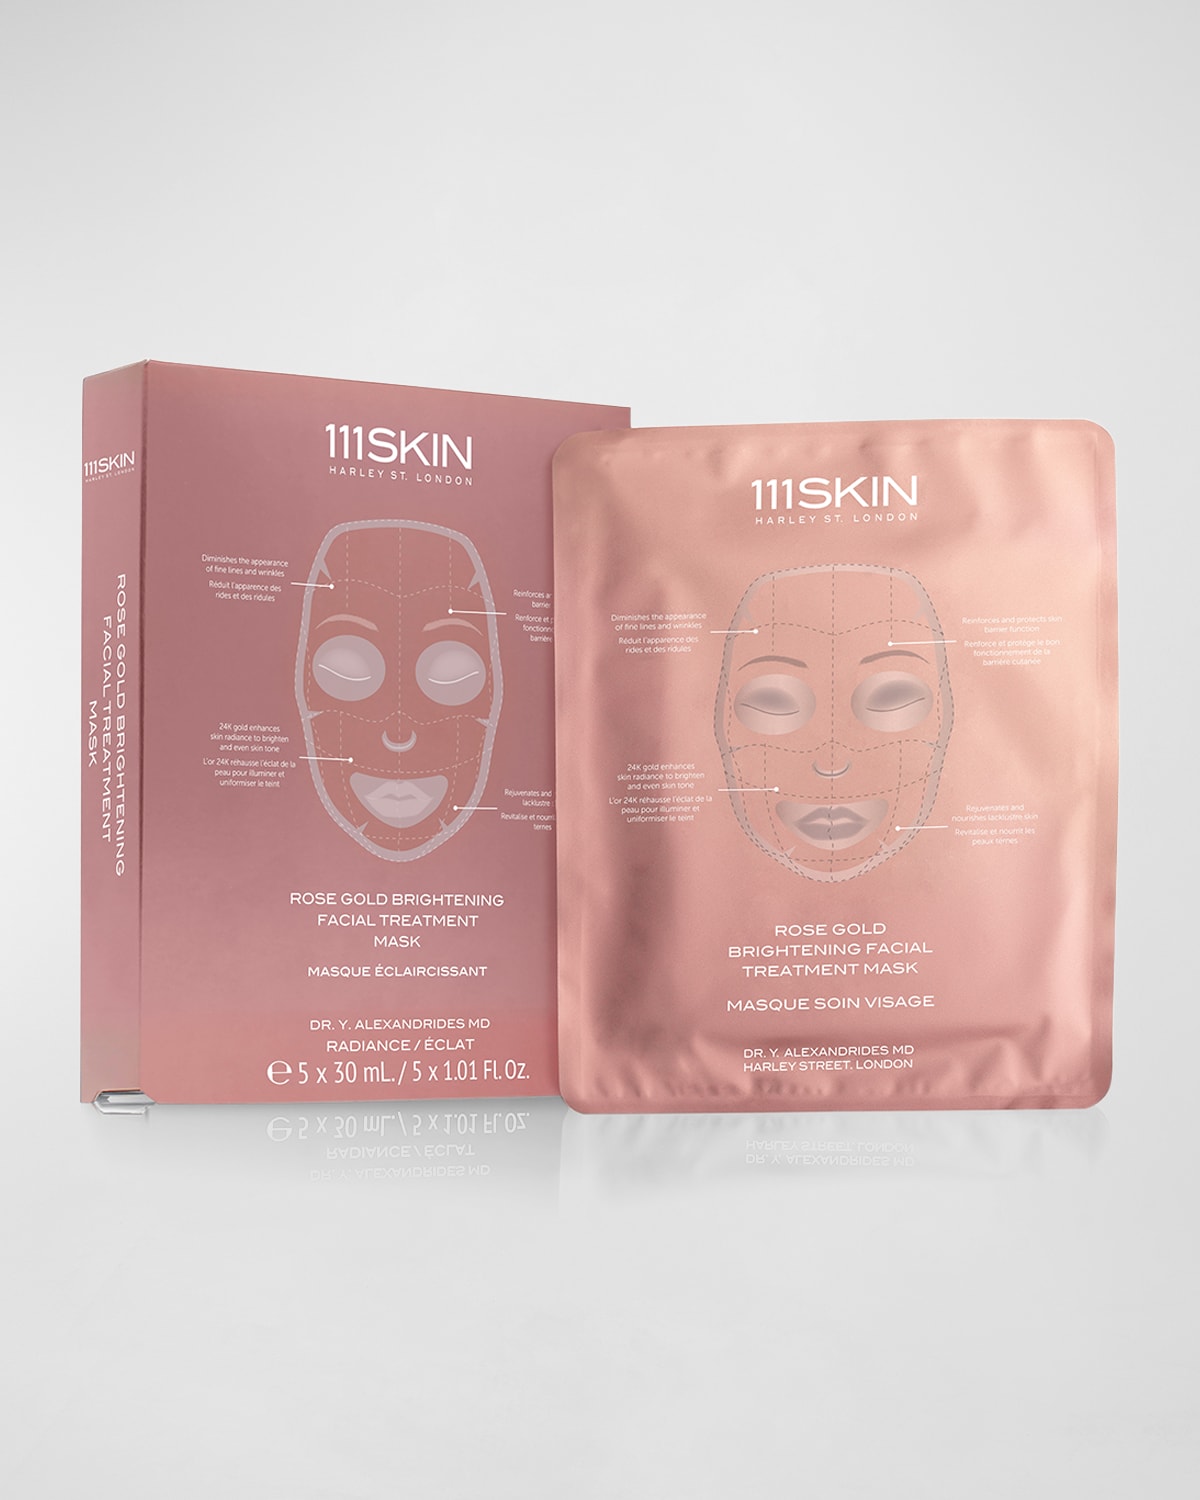 Rose Gold Brightening Facial Treatment Mask Box, 5 Count